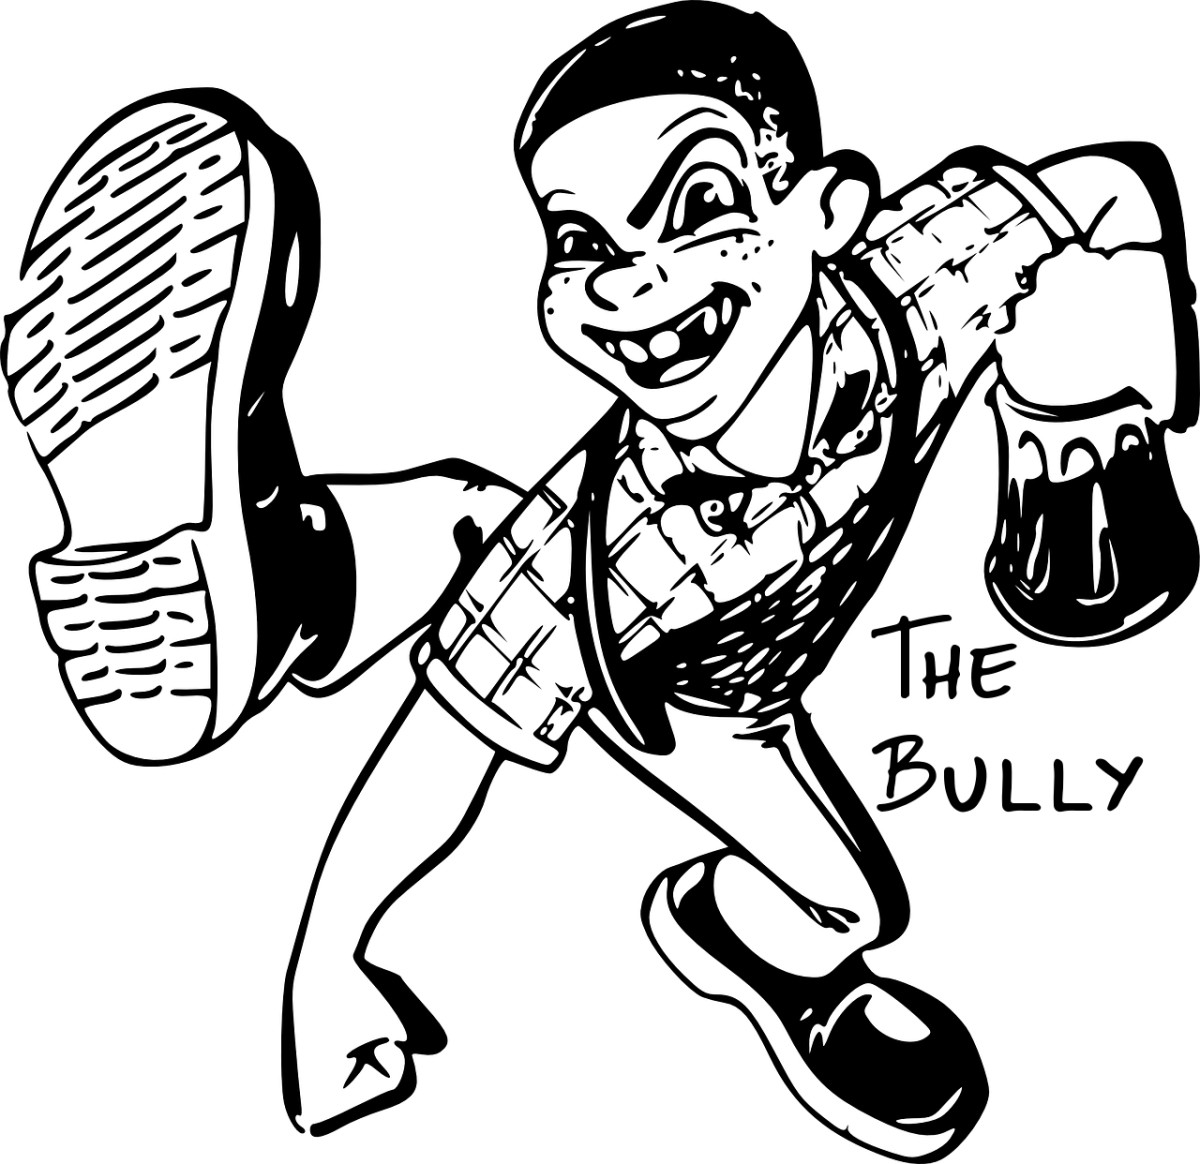 The Bully: Text added via Picfont